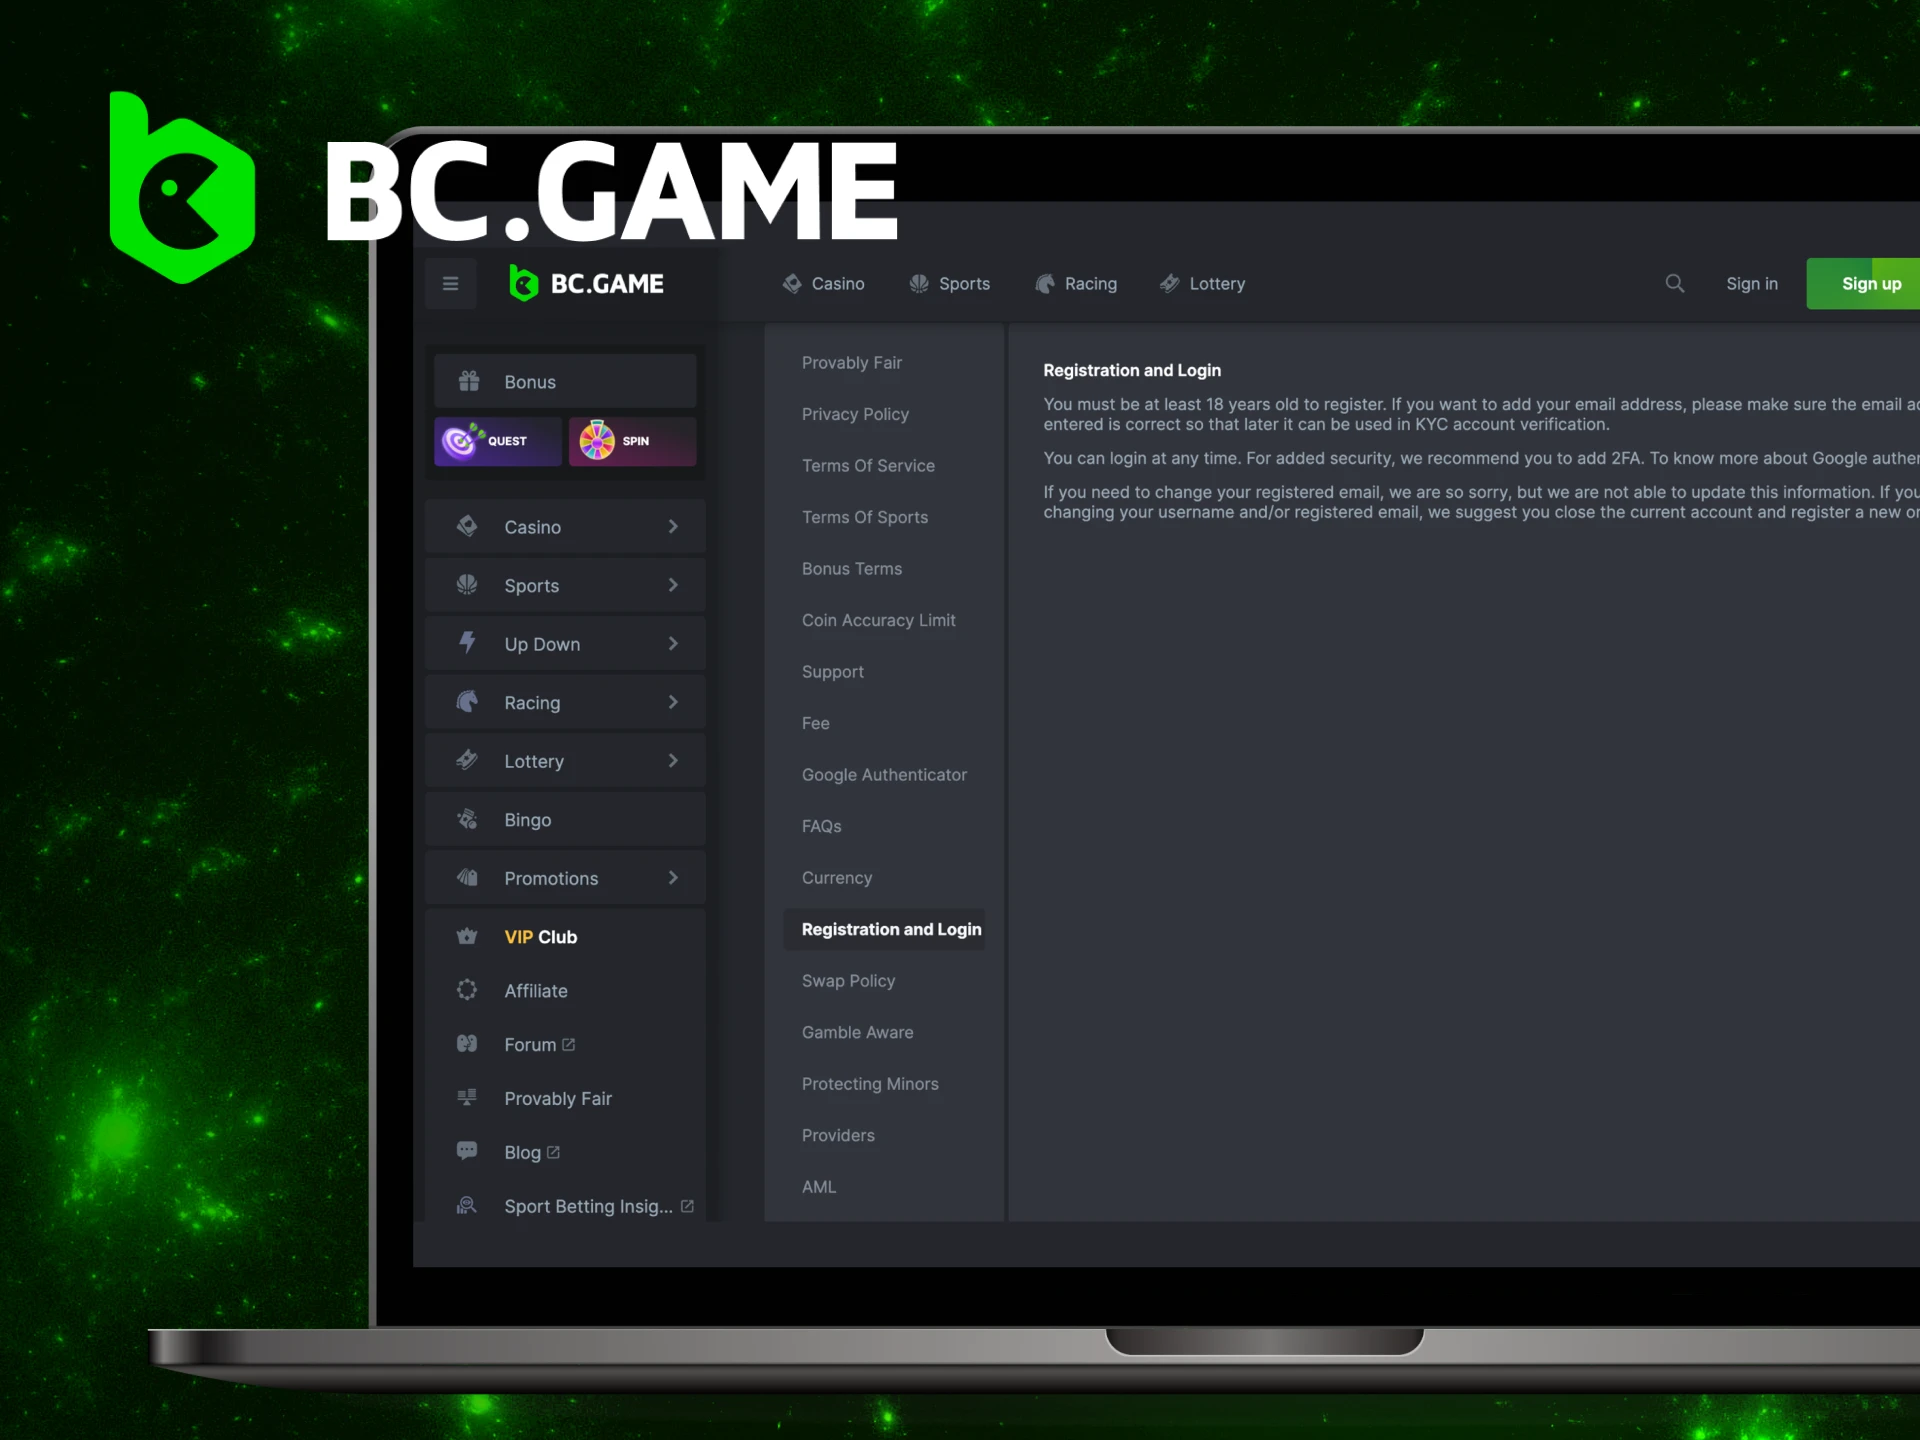 What are the requirements for registering a gaming account on the BC Game casino website.